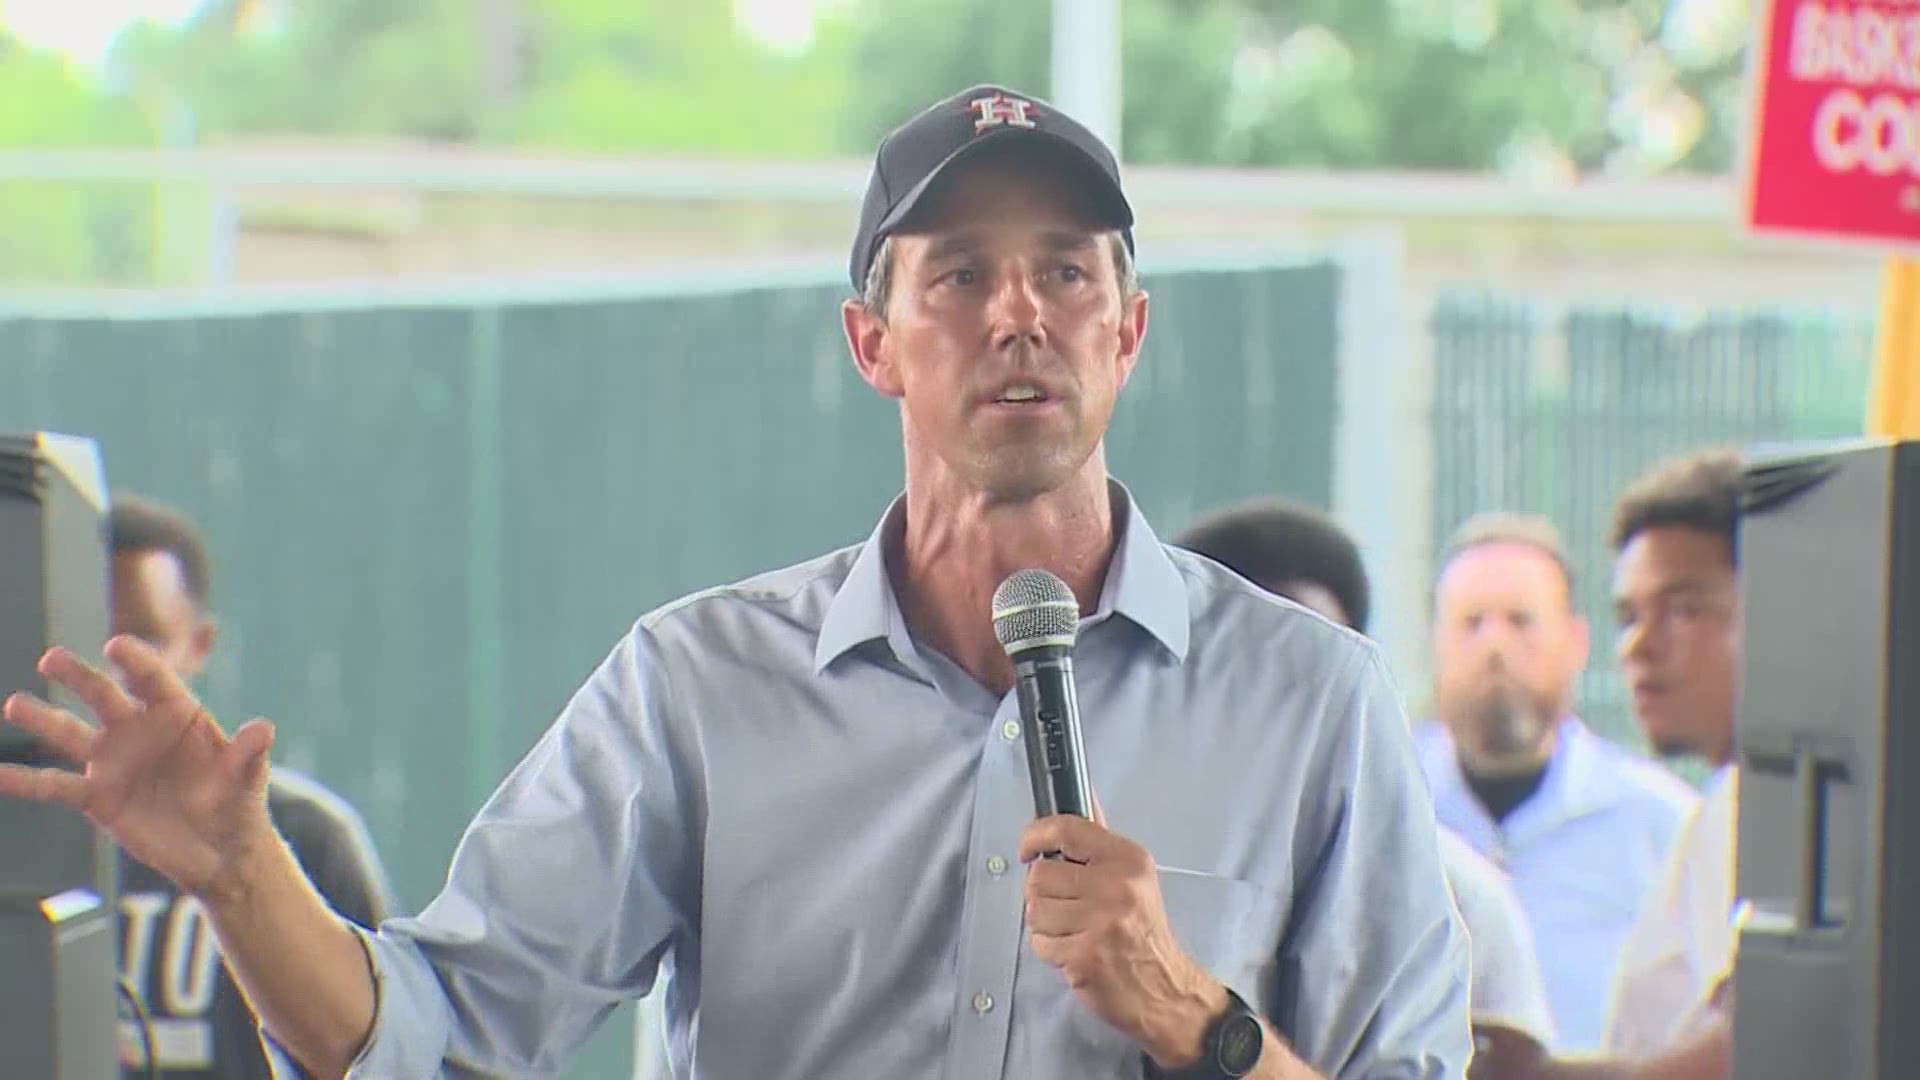 O'Rourke wants to rally voters to stand up and speak out against legislation he says is aimed at restricting the right to vote.